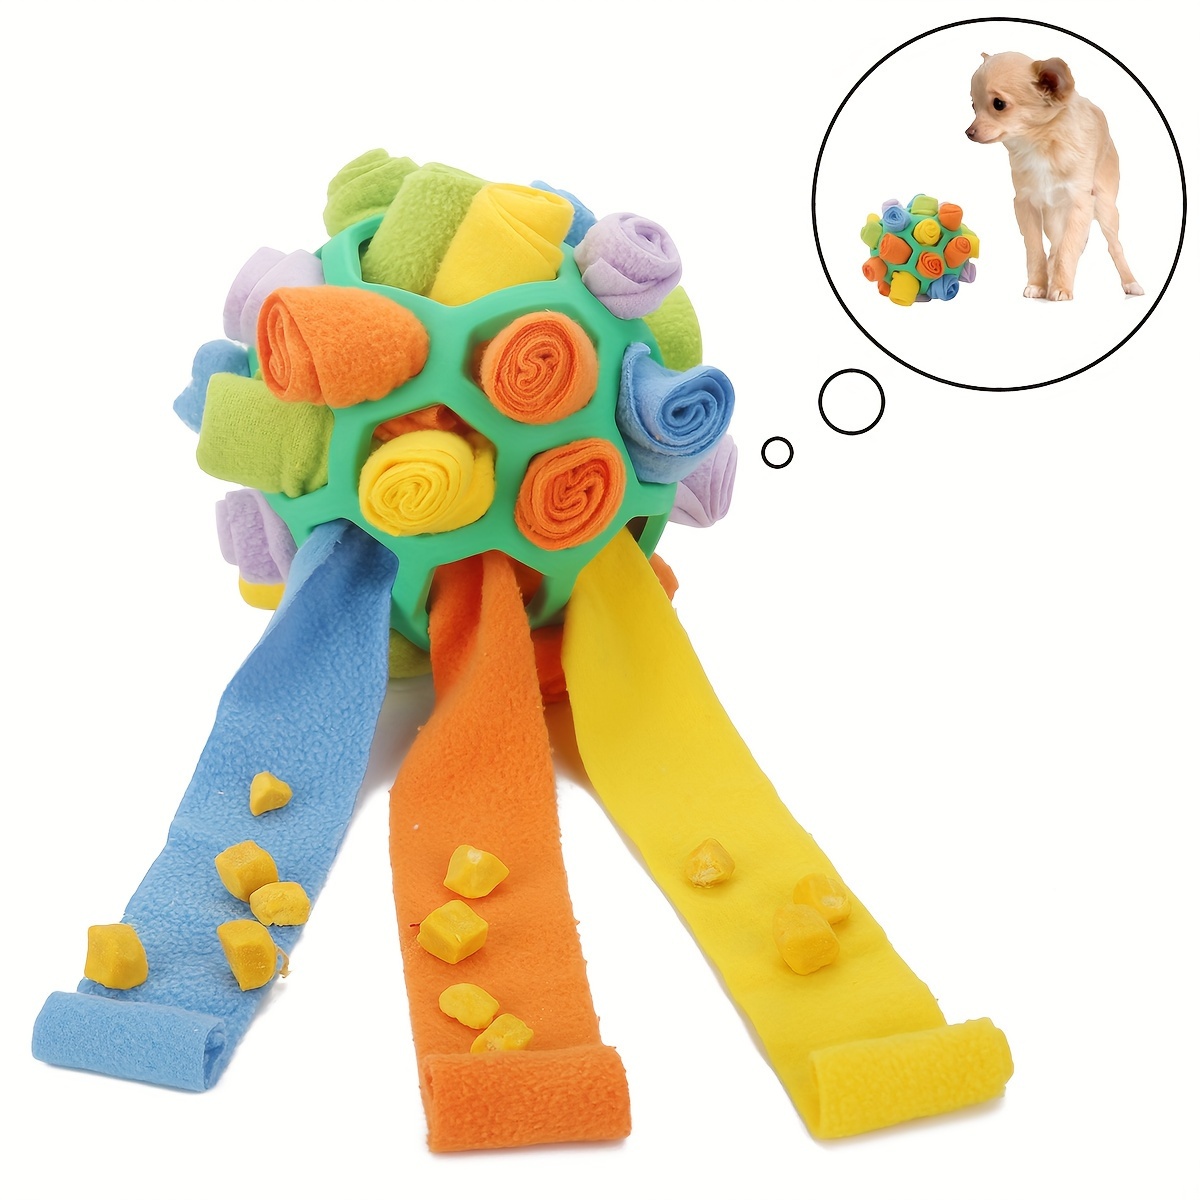 

Interactive Dog Toy - Sniffing Ball For Hiding Treats - Rubber Puzzle Ball For Mental Stimulation